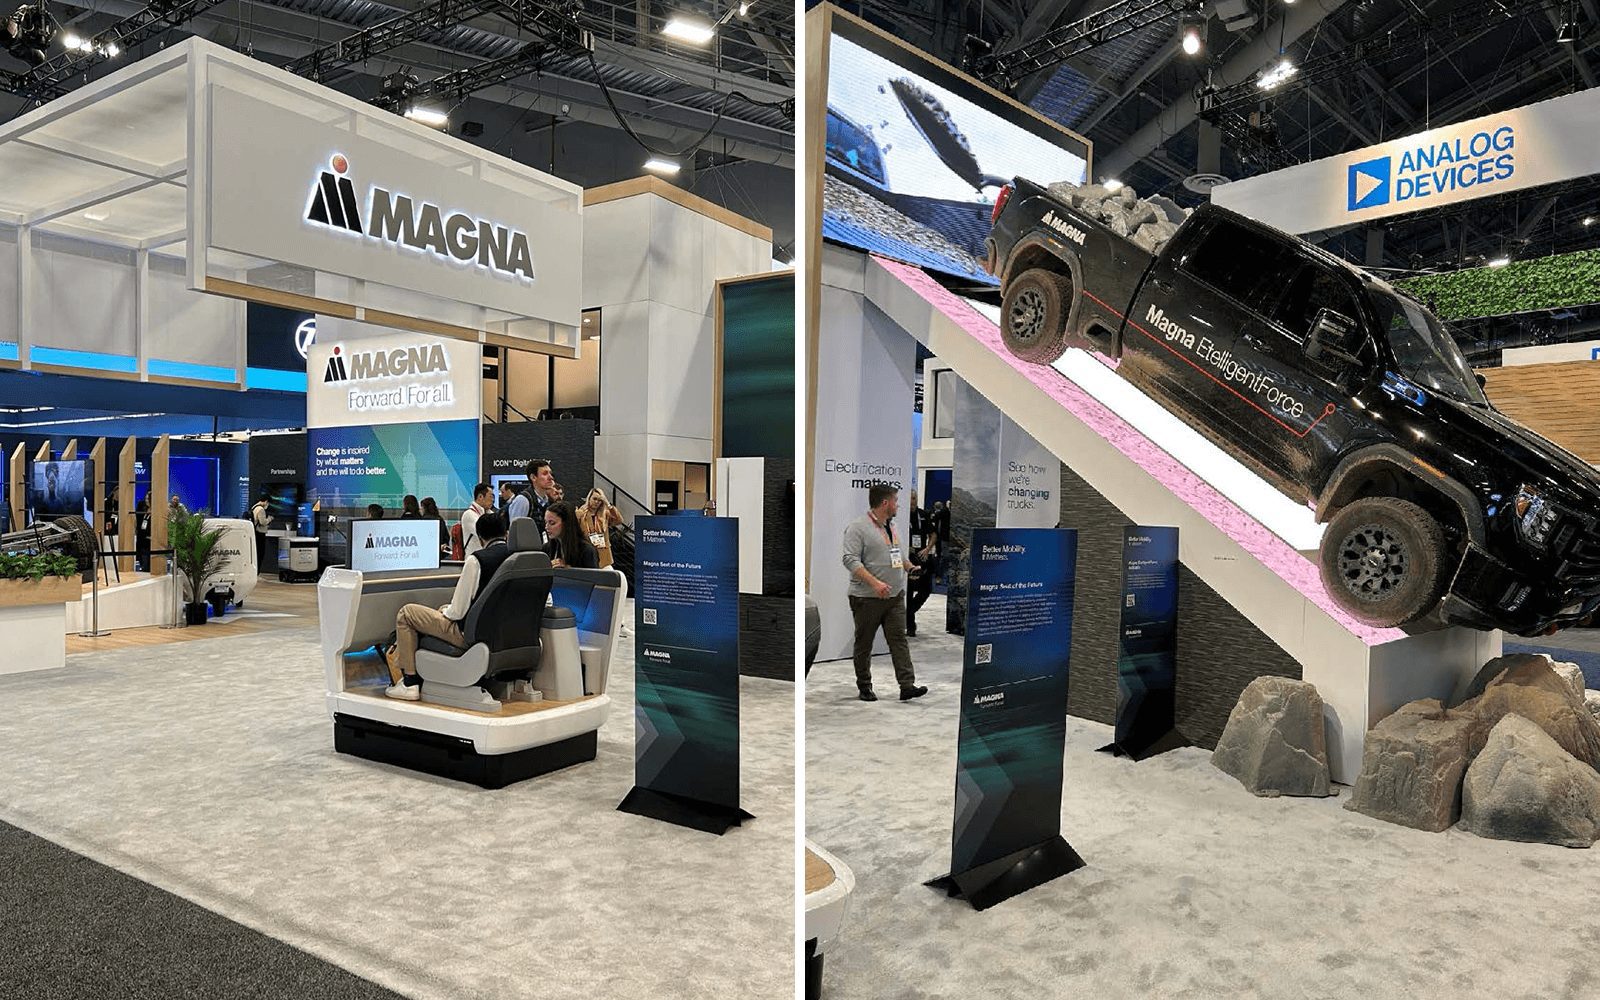 Magna's booth featured a huge structure and truck